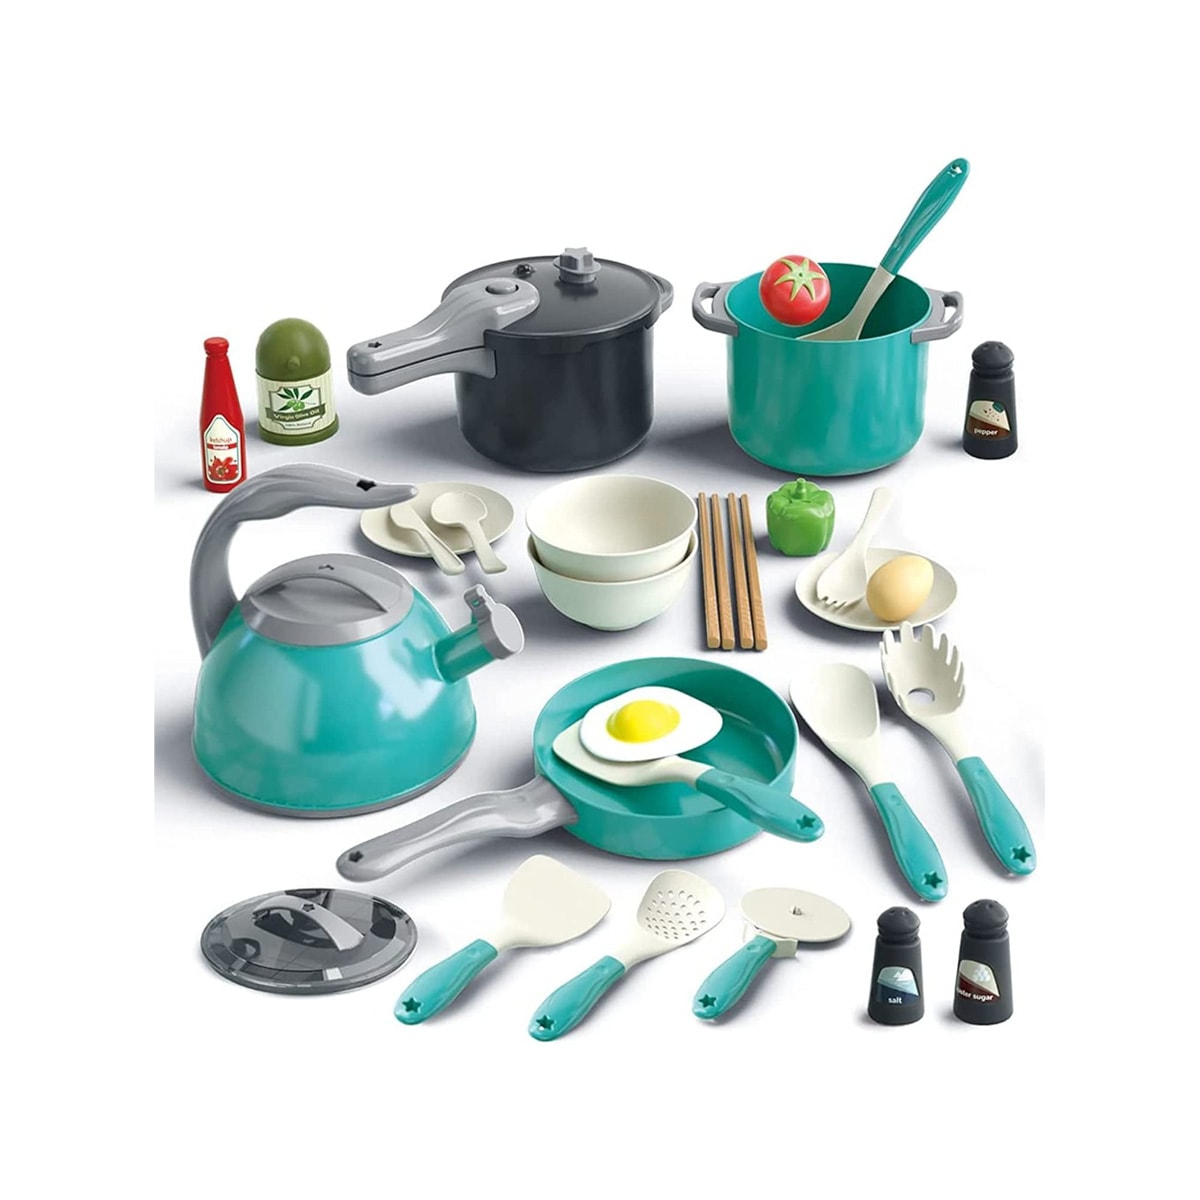 The Best Pots & Pans Sets To Make Cooking Fun